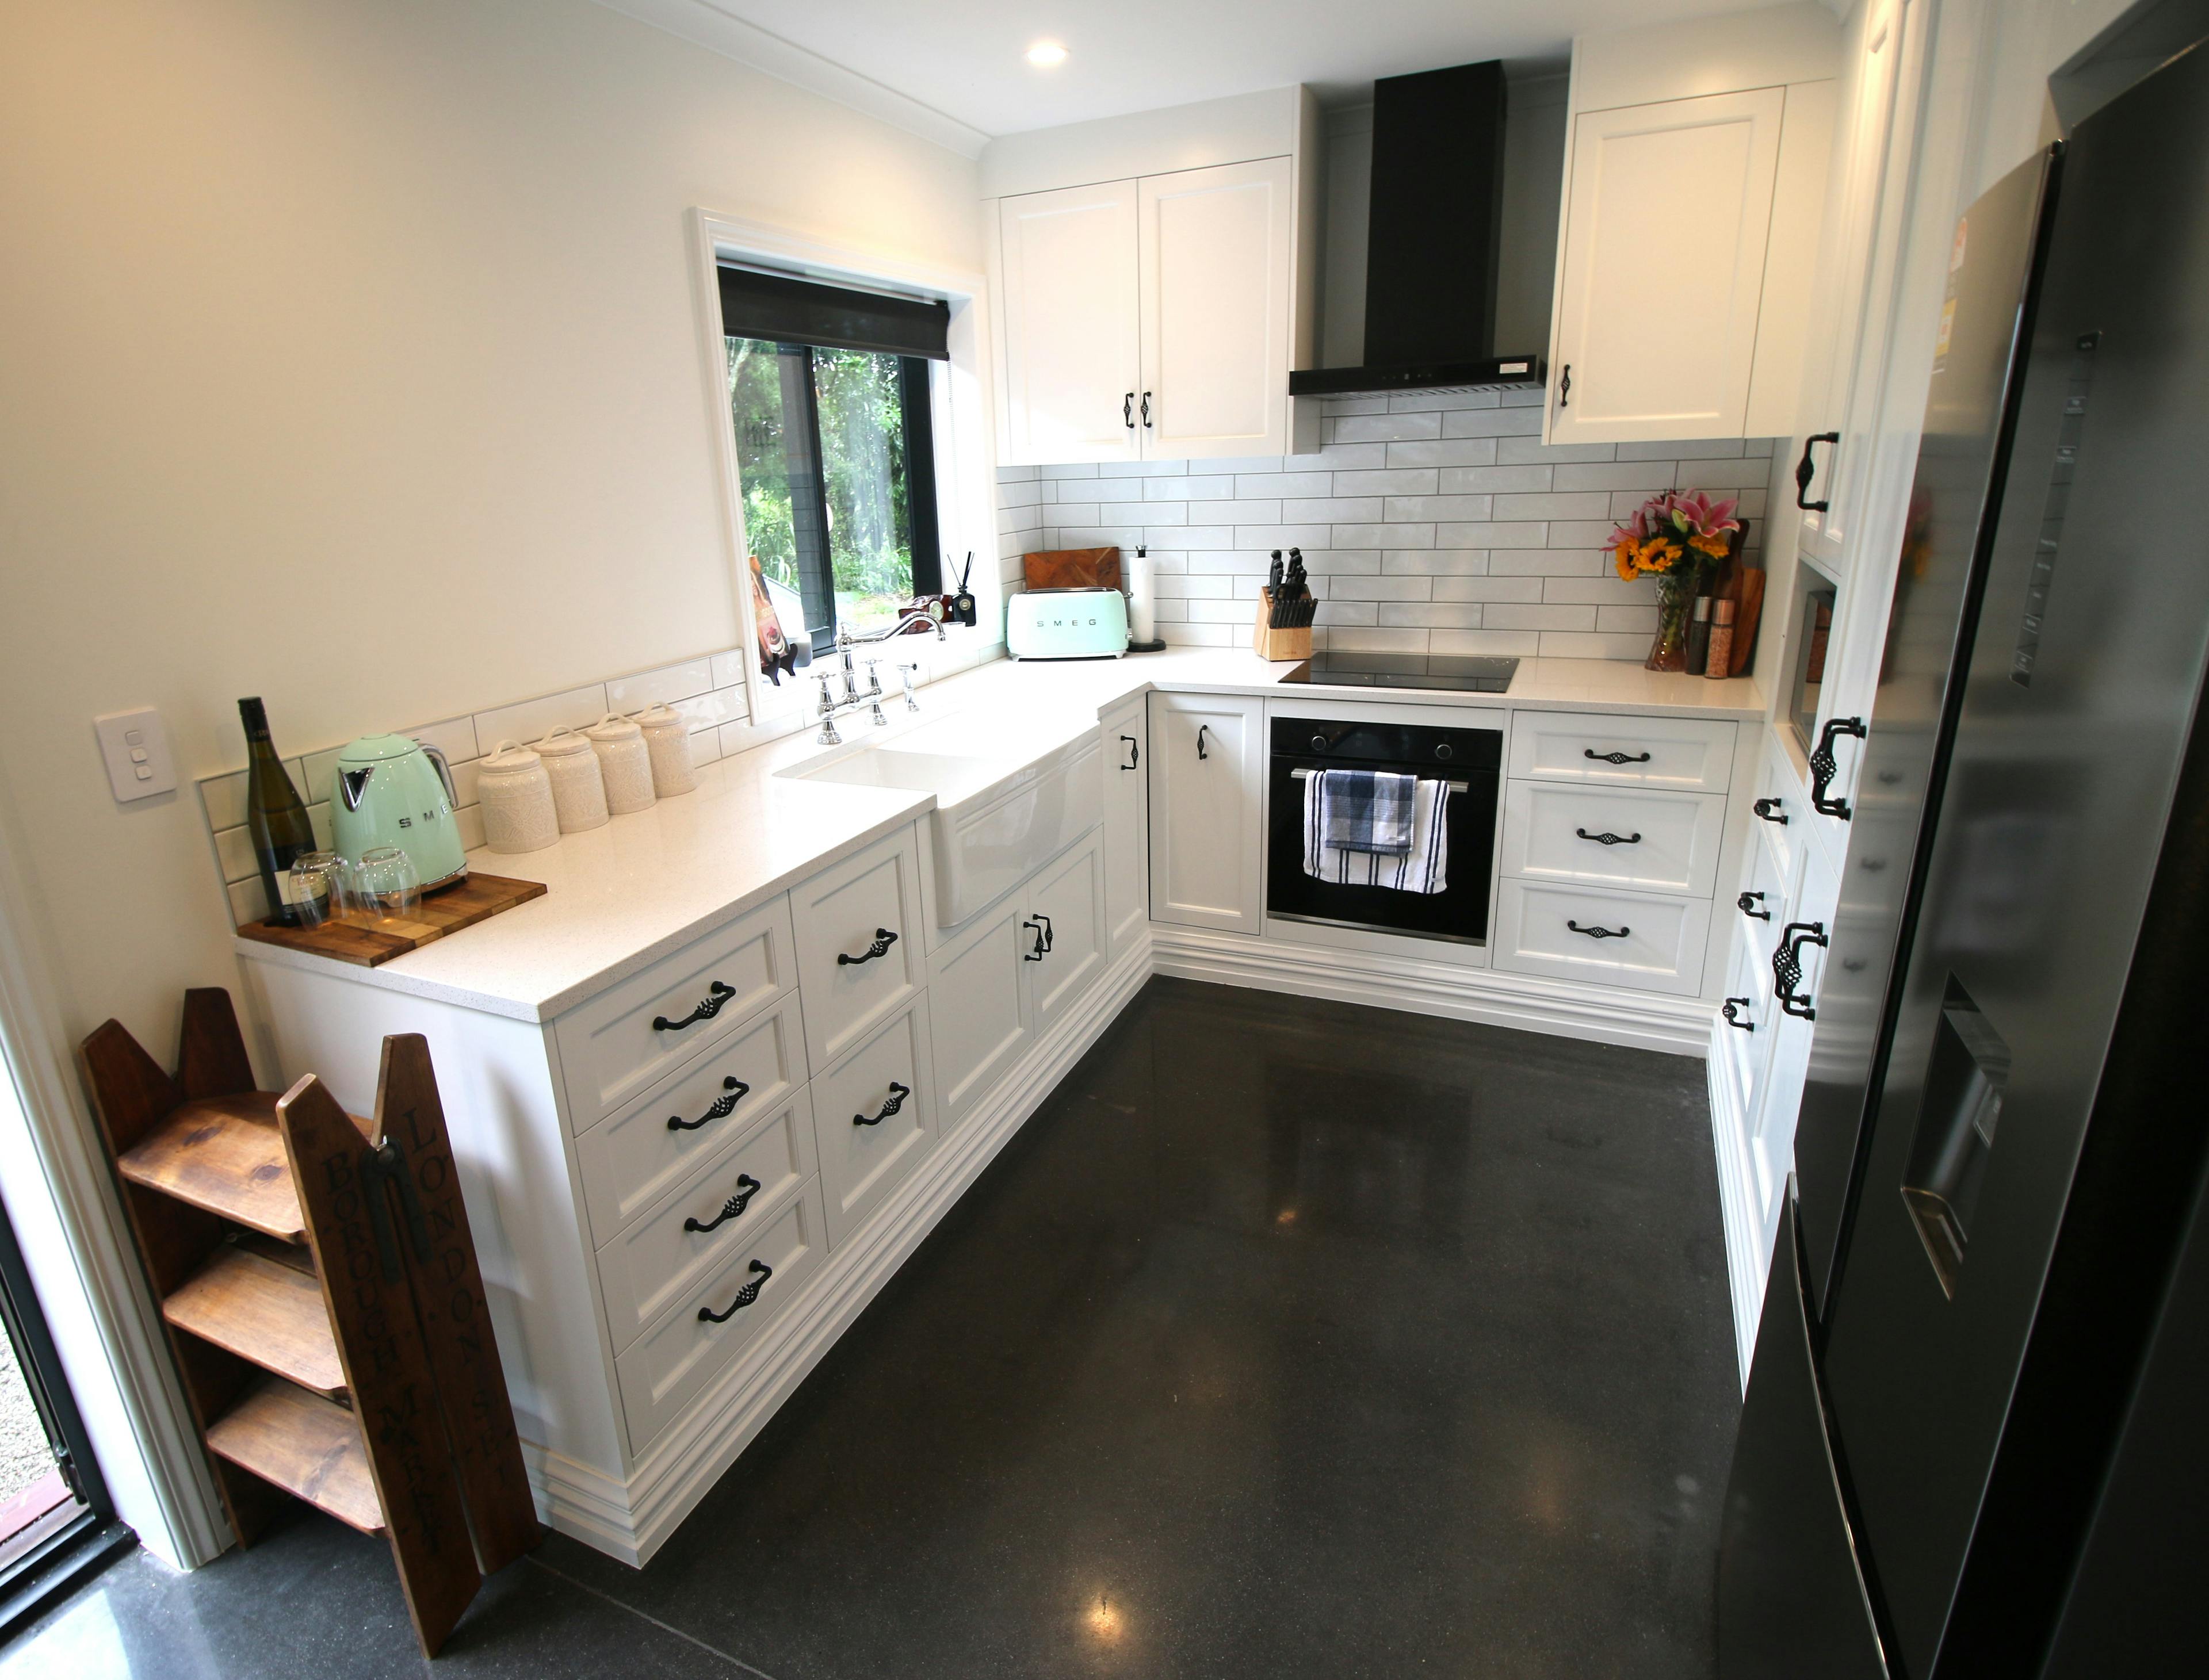 A picture a kitchen designed and installed by The Kitchen Zone